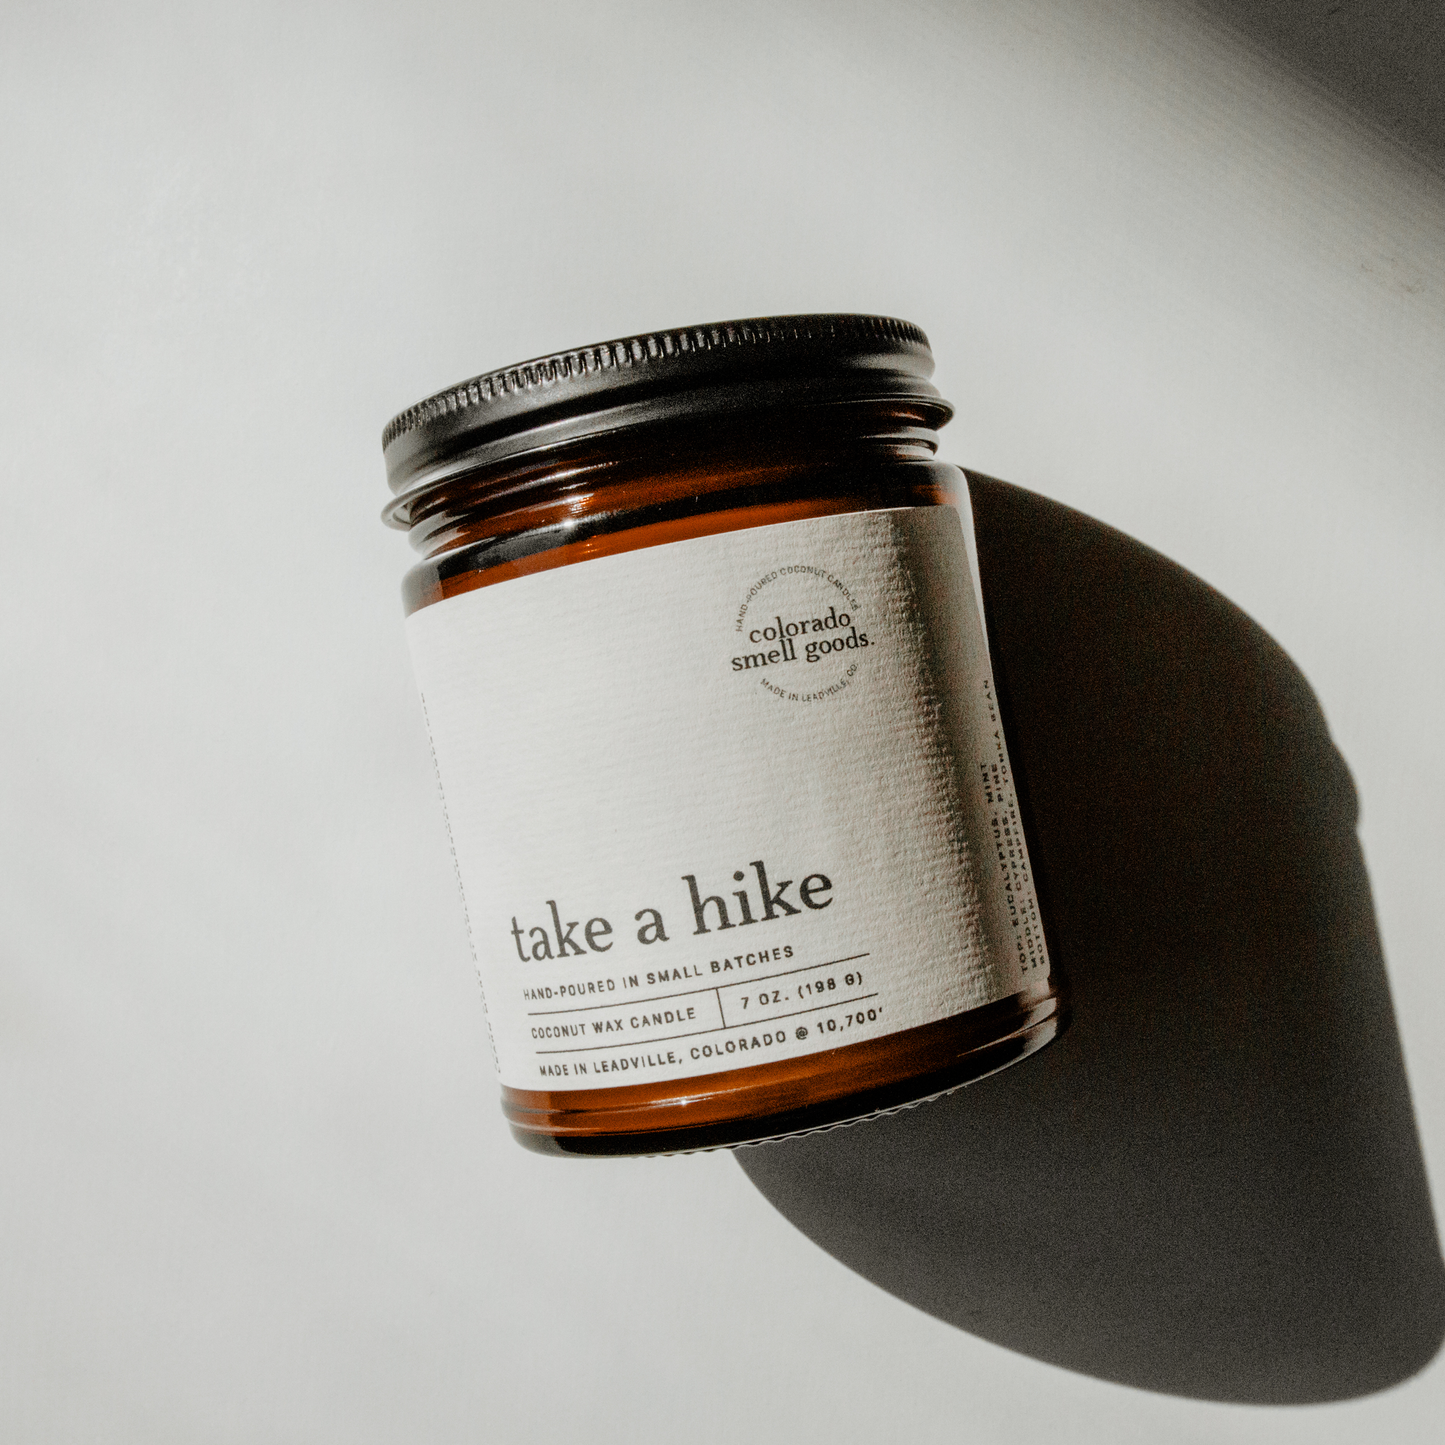 take a hike candle - birch eucalyptus and pine coconut wax candle